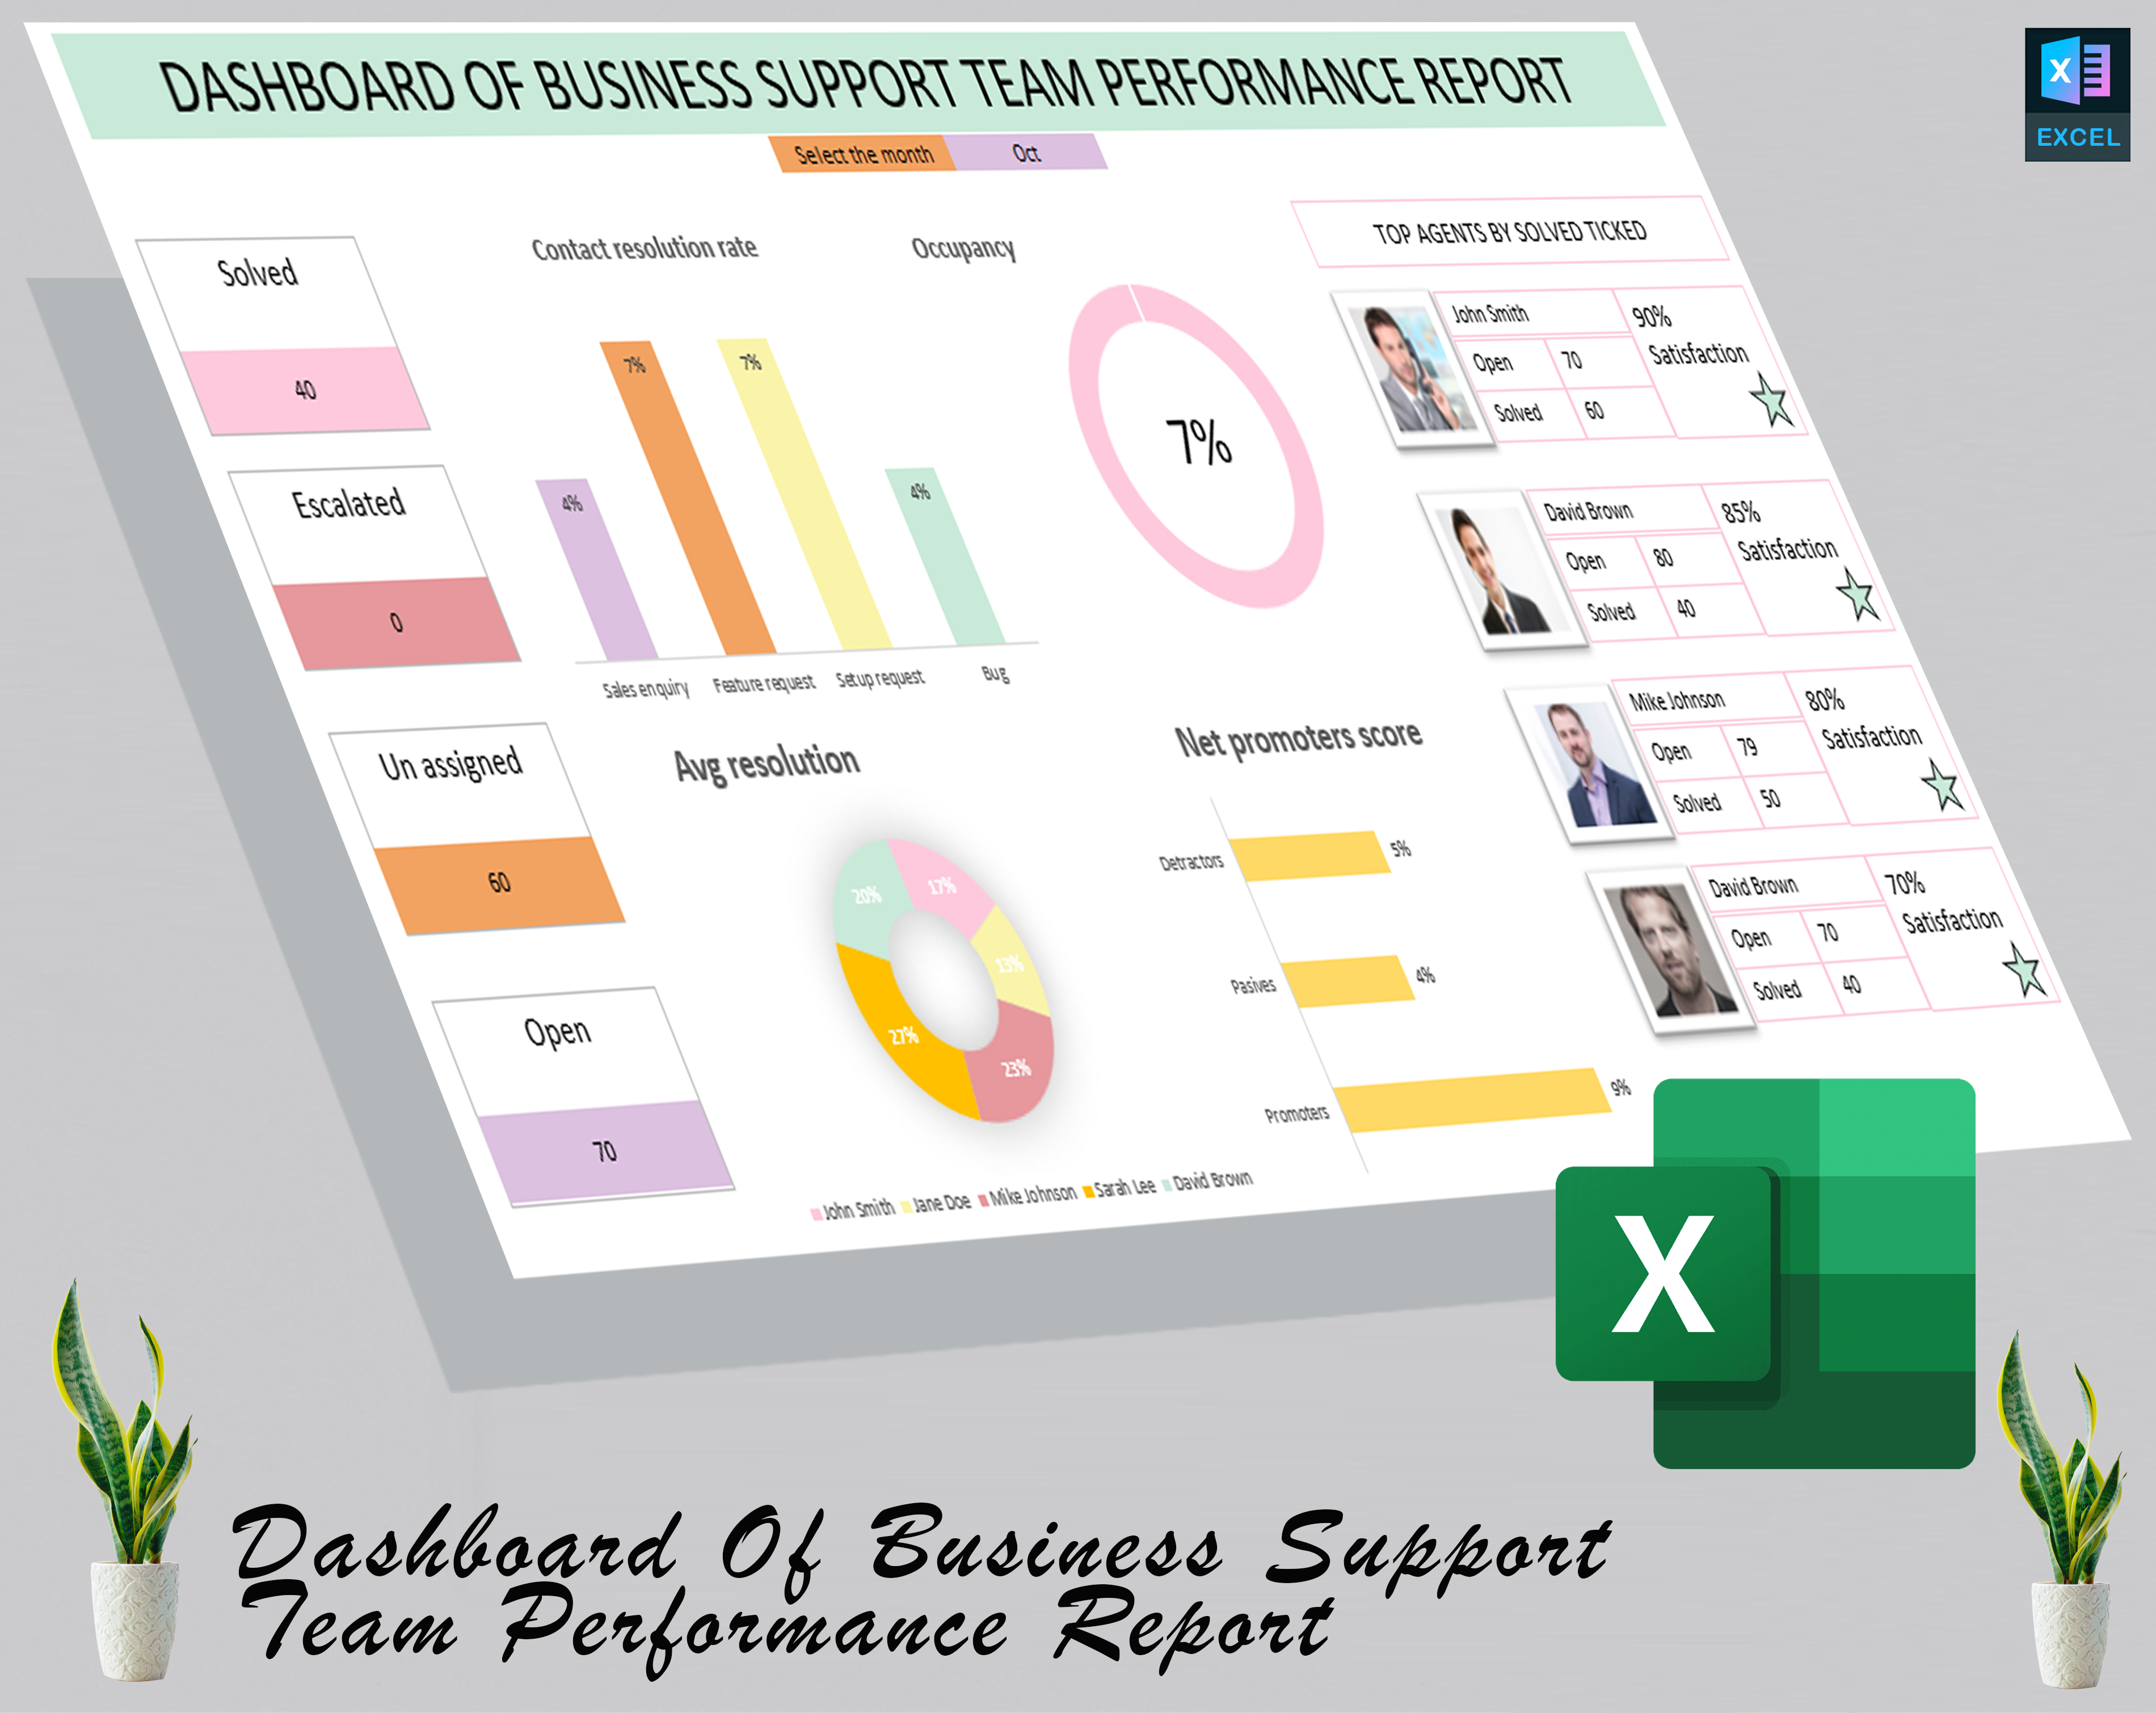 Dashboard Of Business Support Team Performance Report